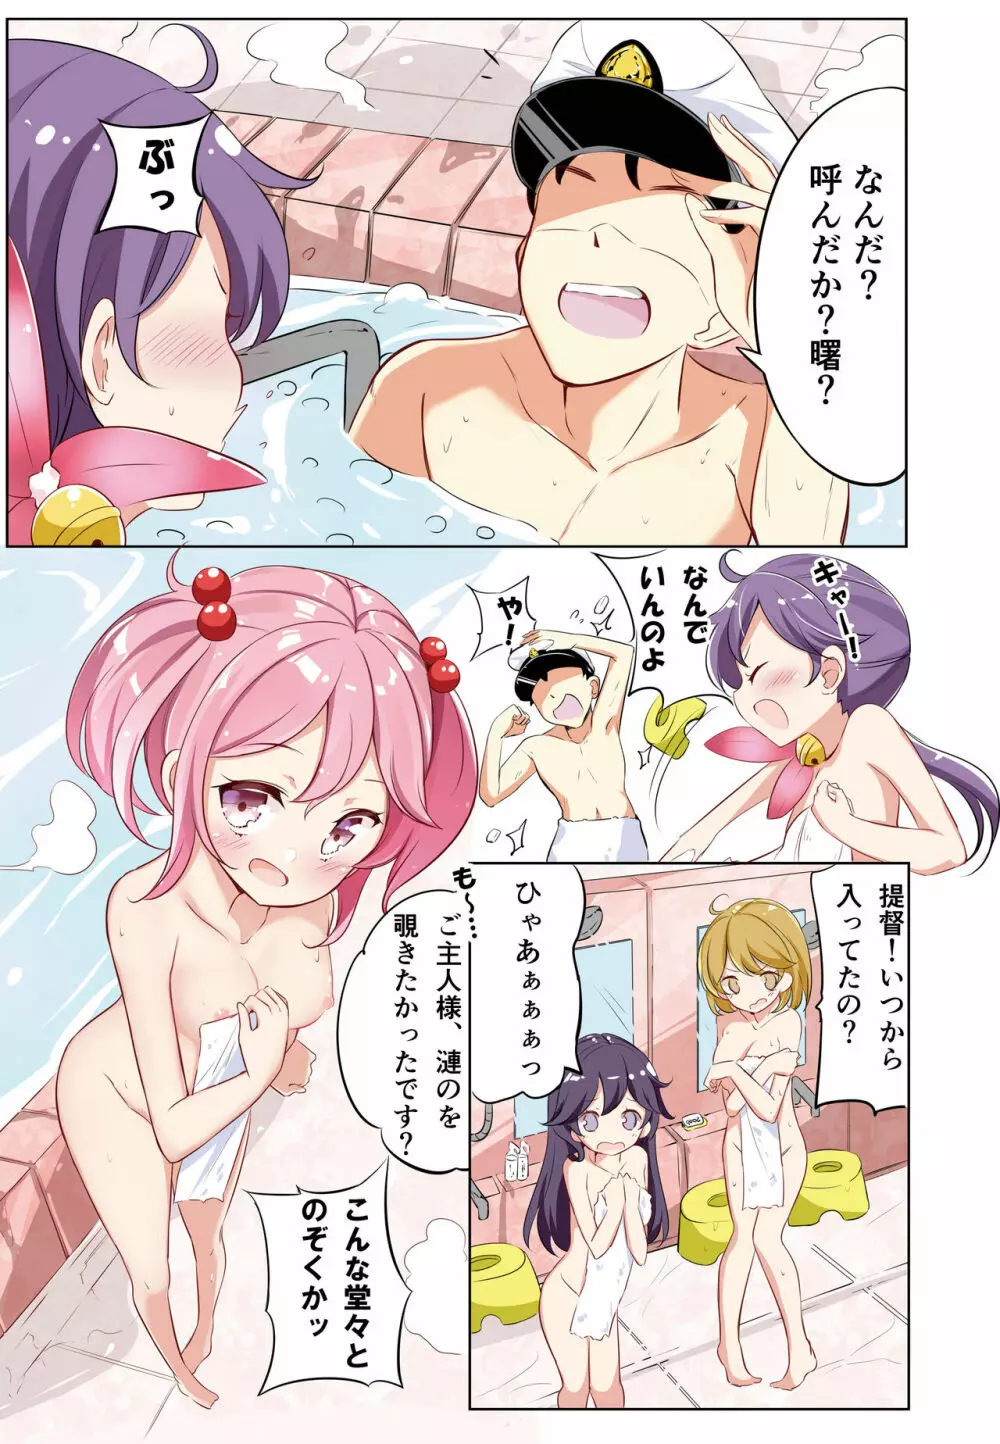 hamaken collection 総集編vol 9～12 プラス 七駆の乳くらべ Page.52